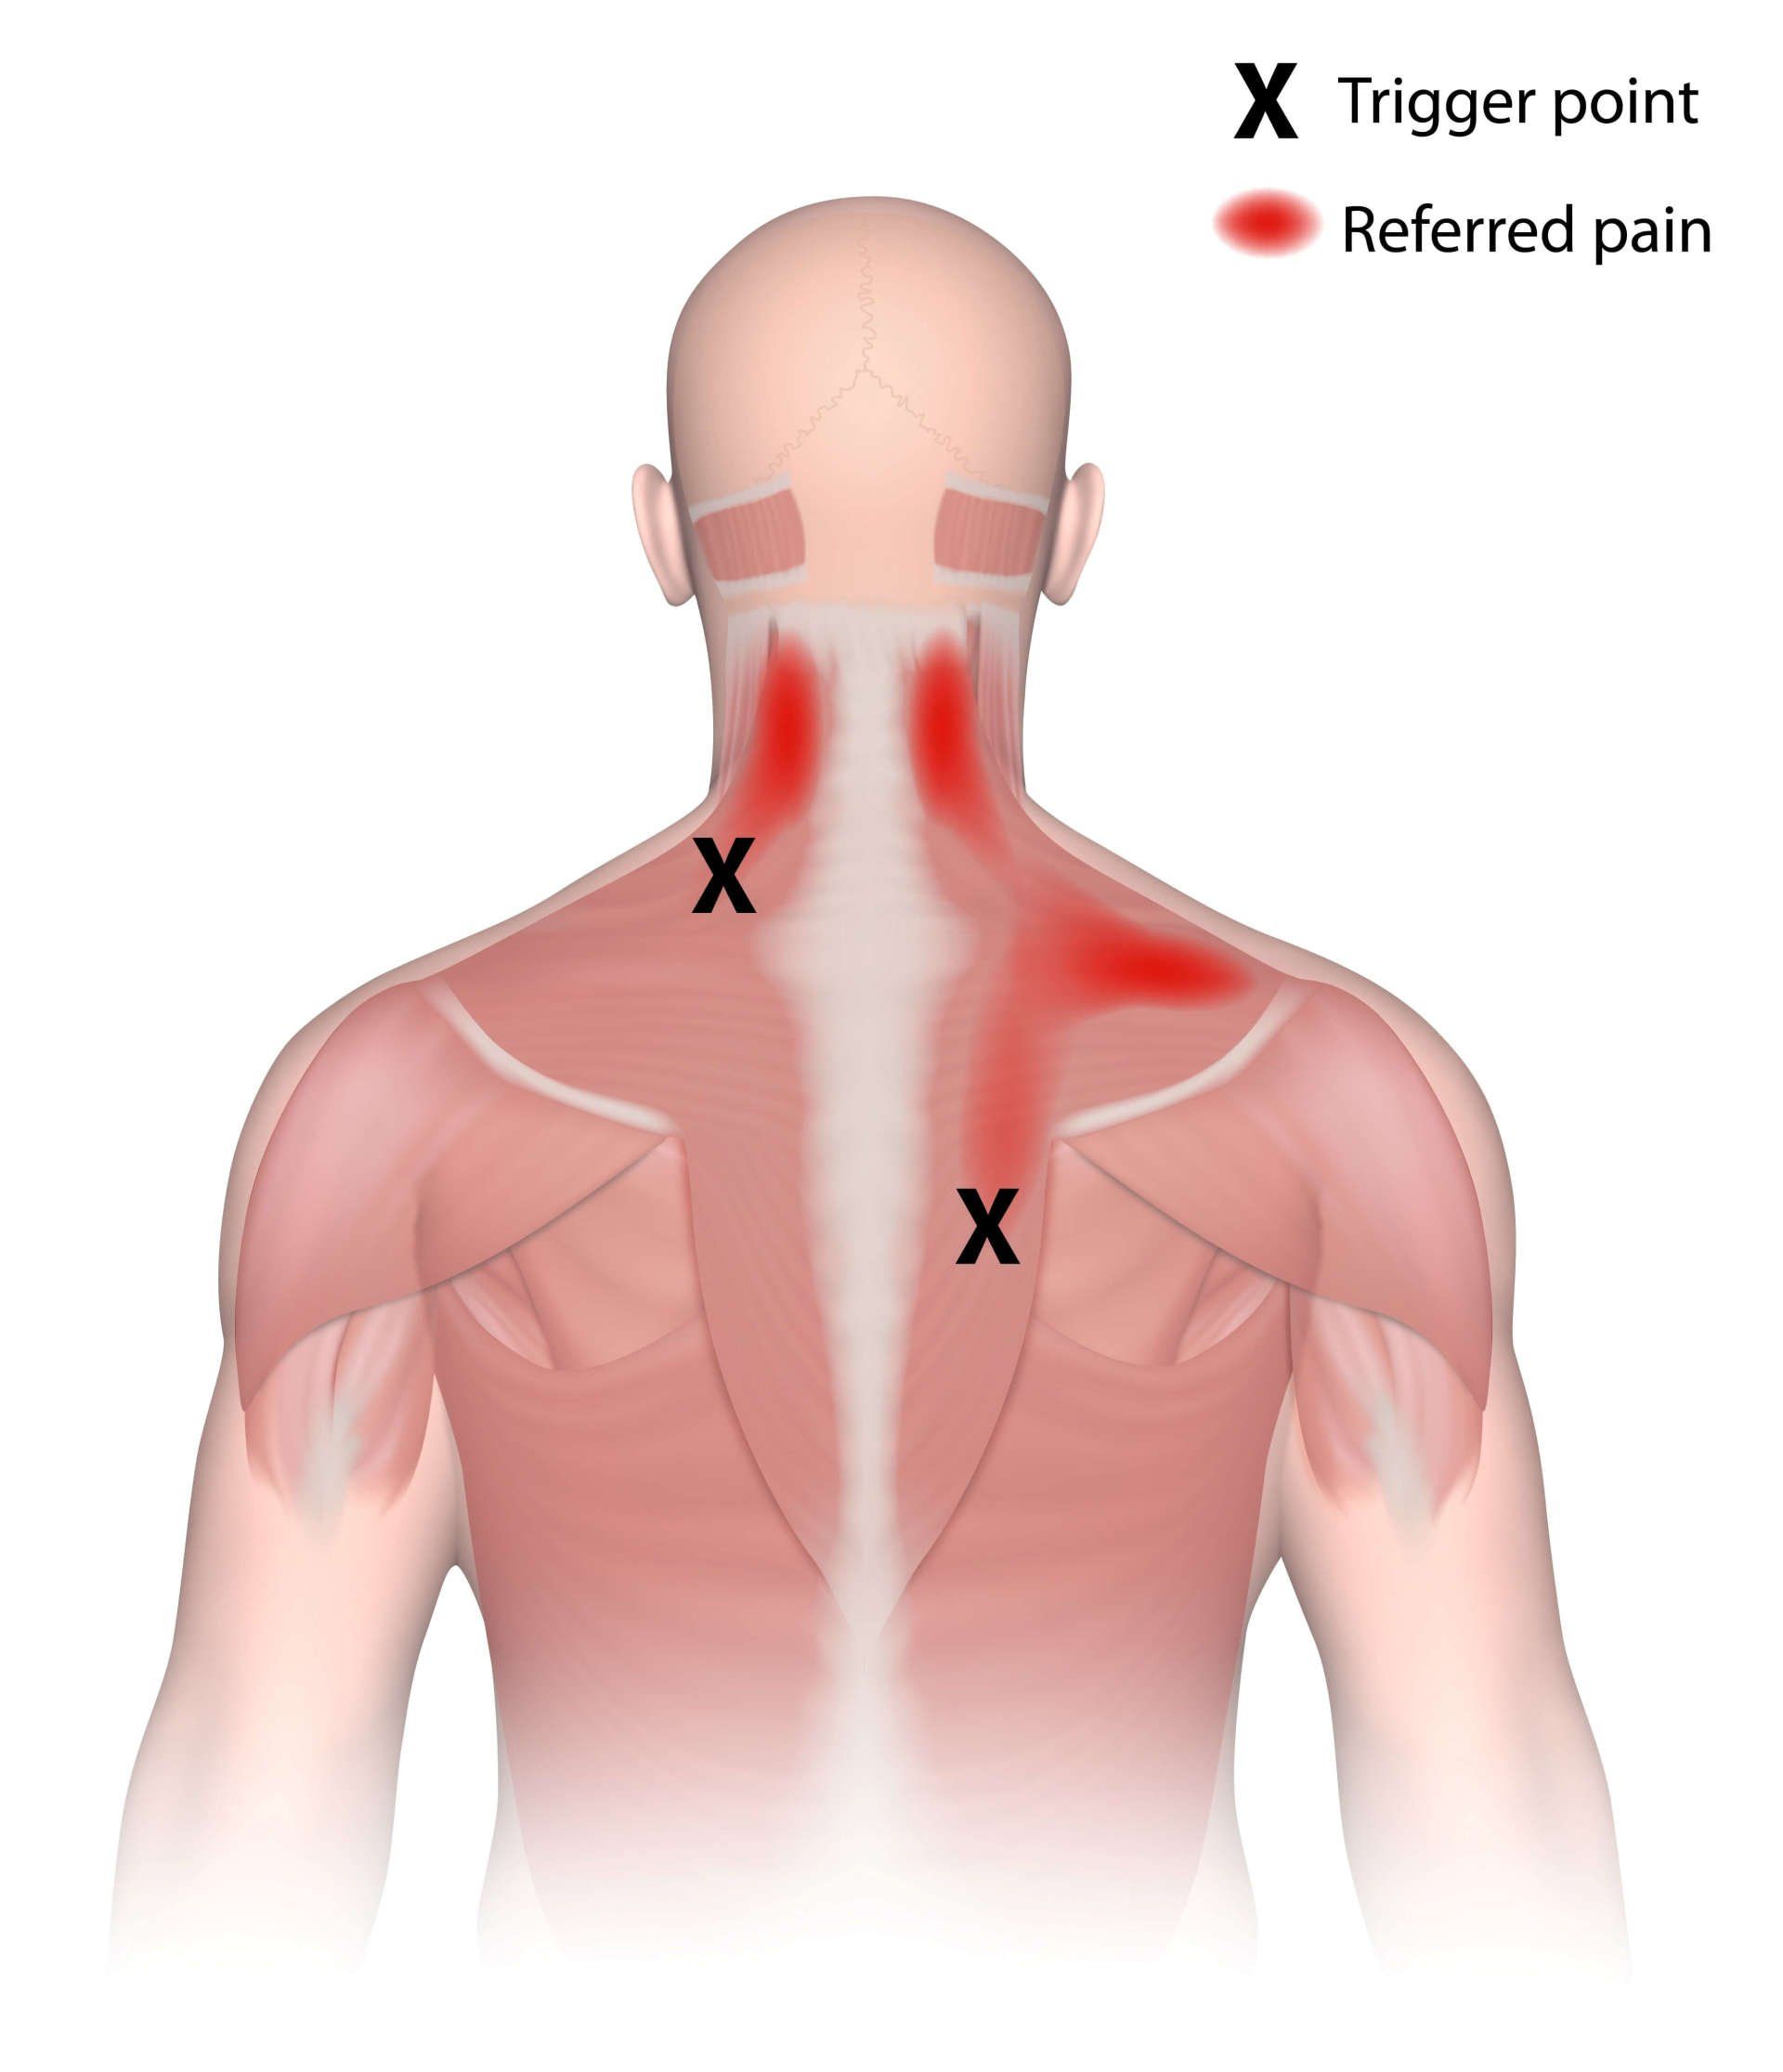 Trigger points and referred pain